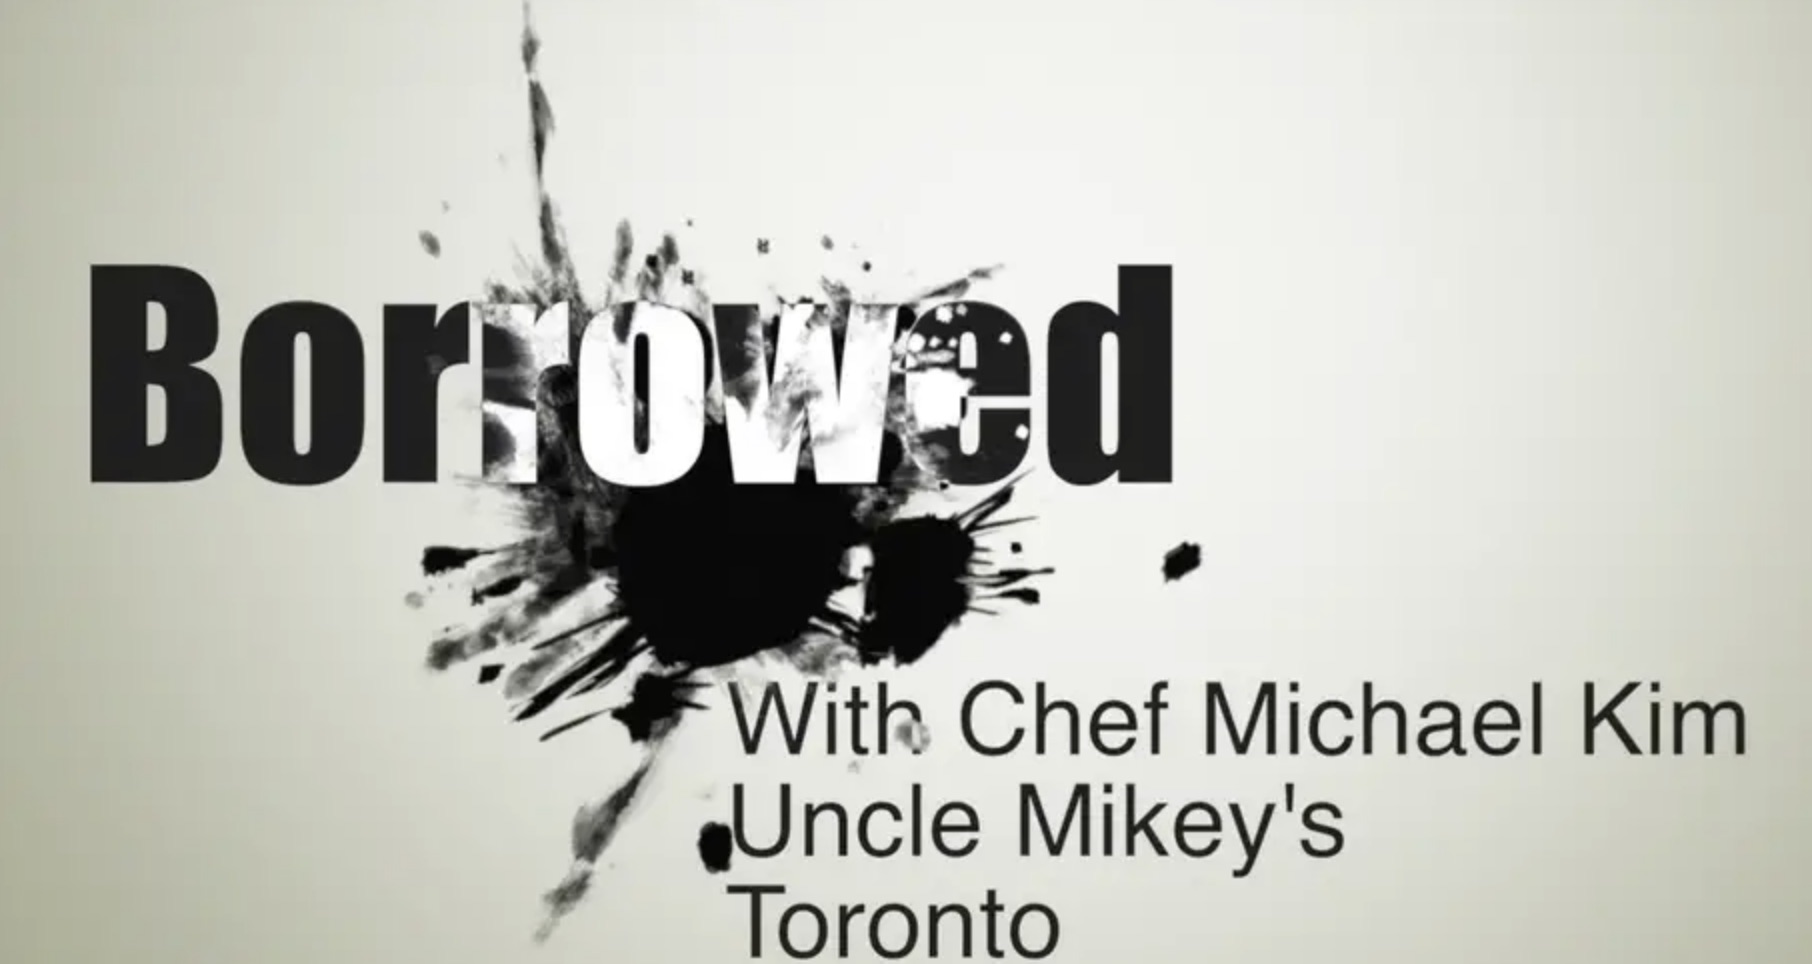 Borrowed : With Michael Kim Of Toronto’s Uncle Mikey’s